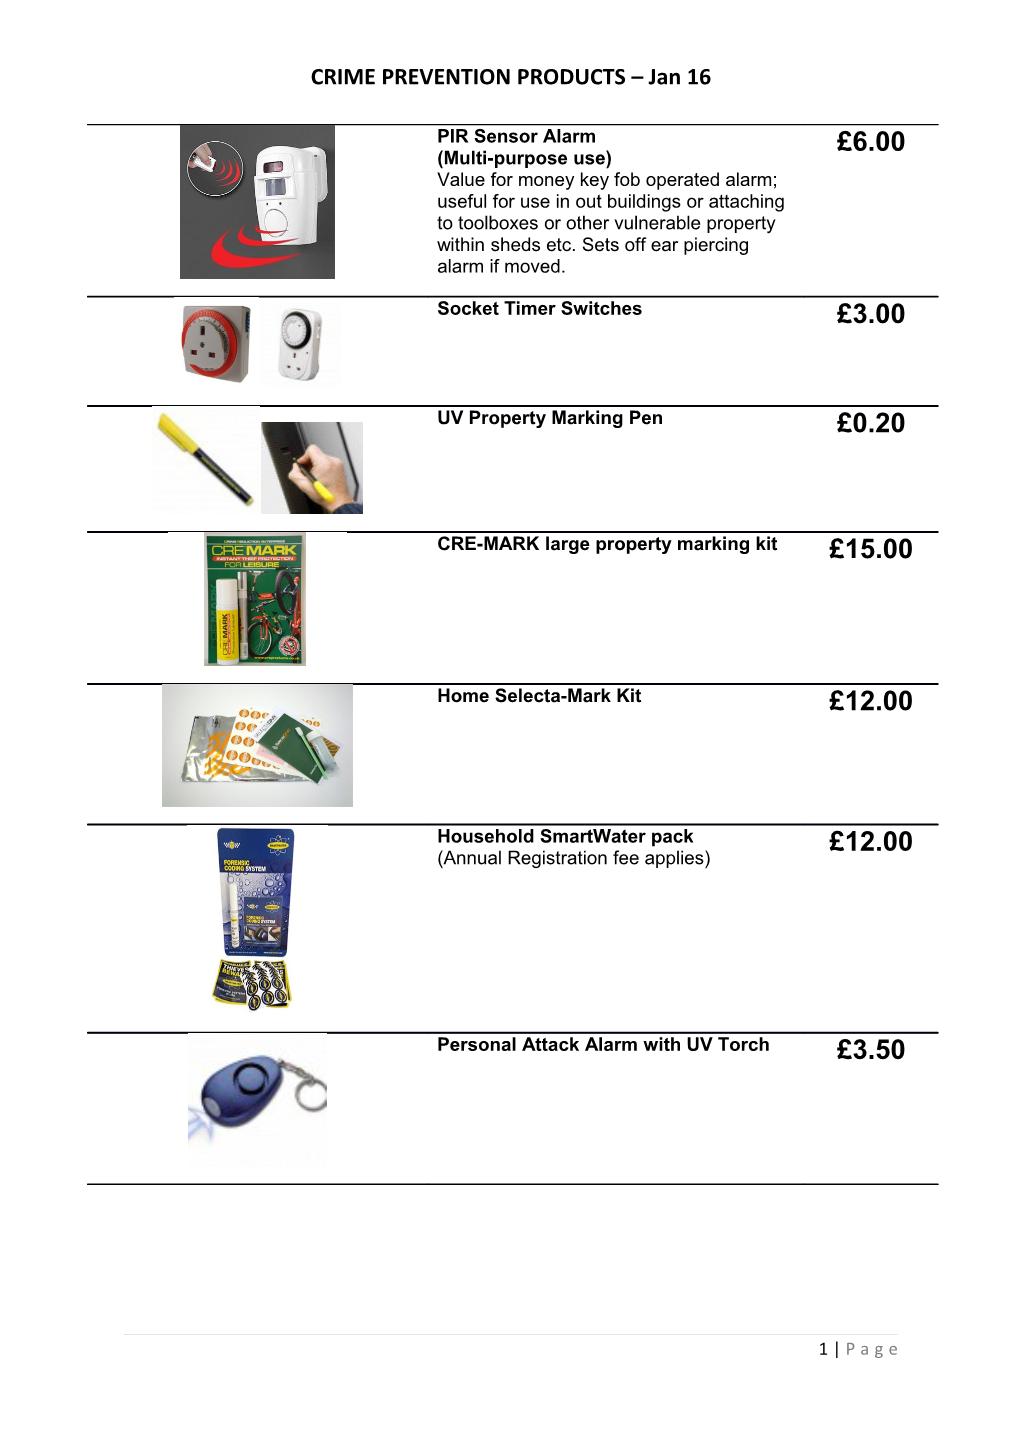 CRIME PREVENTION PRODUCTS Jan 16